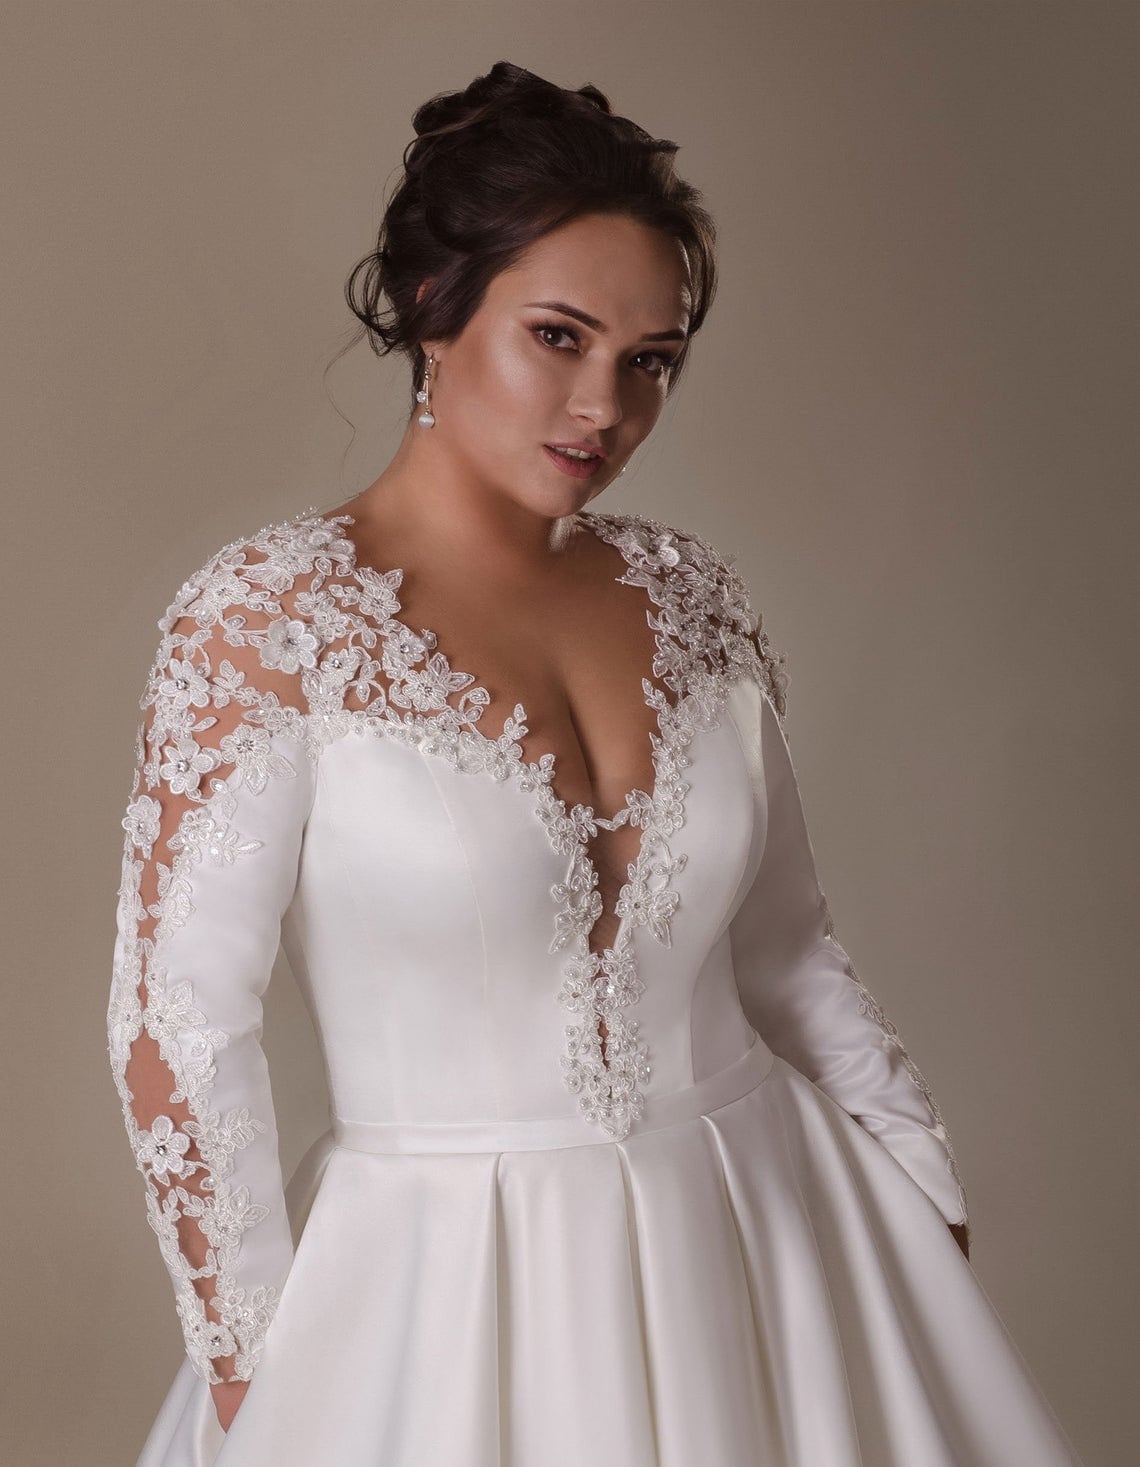 Buy Satin Lace Wedding Dress, Plus Size Bridal Gown, Long Sleeves